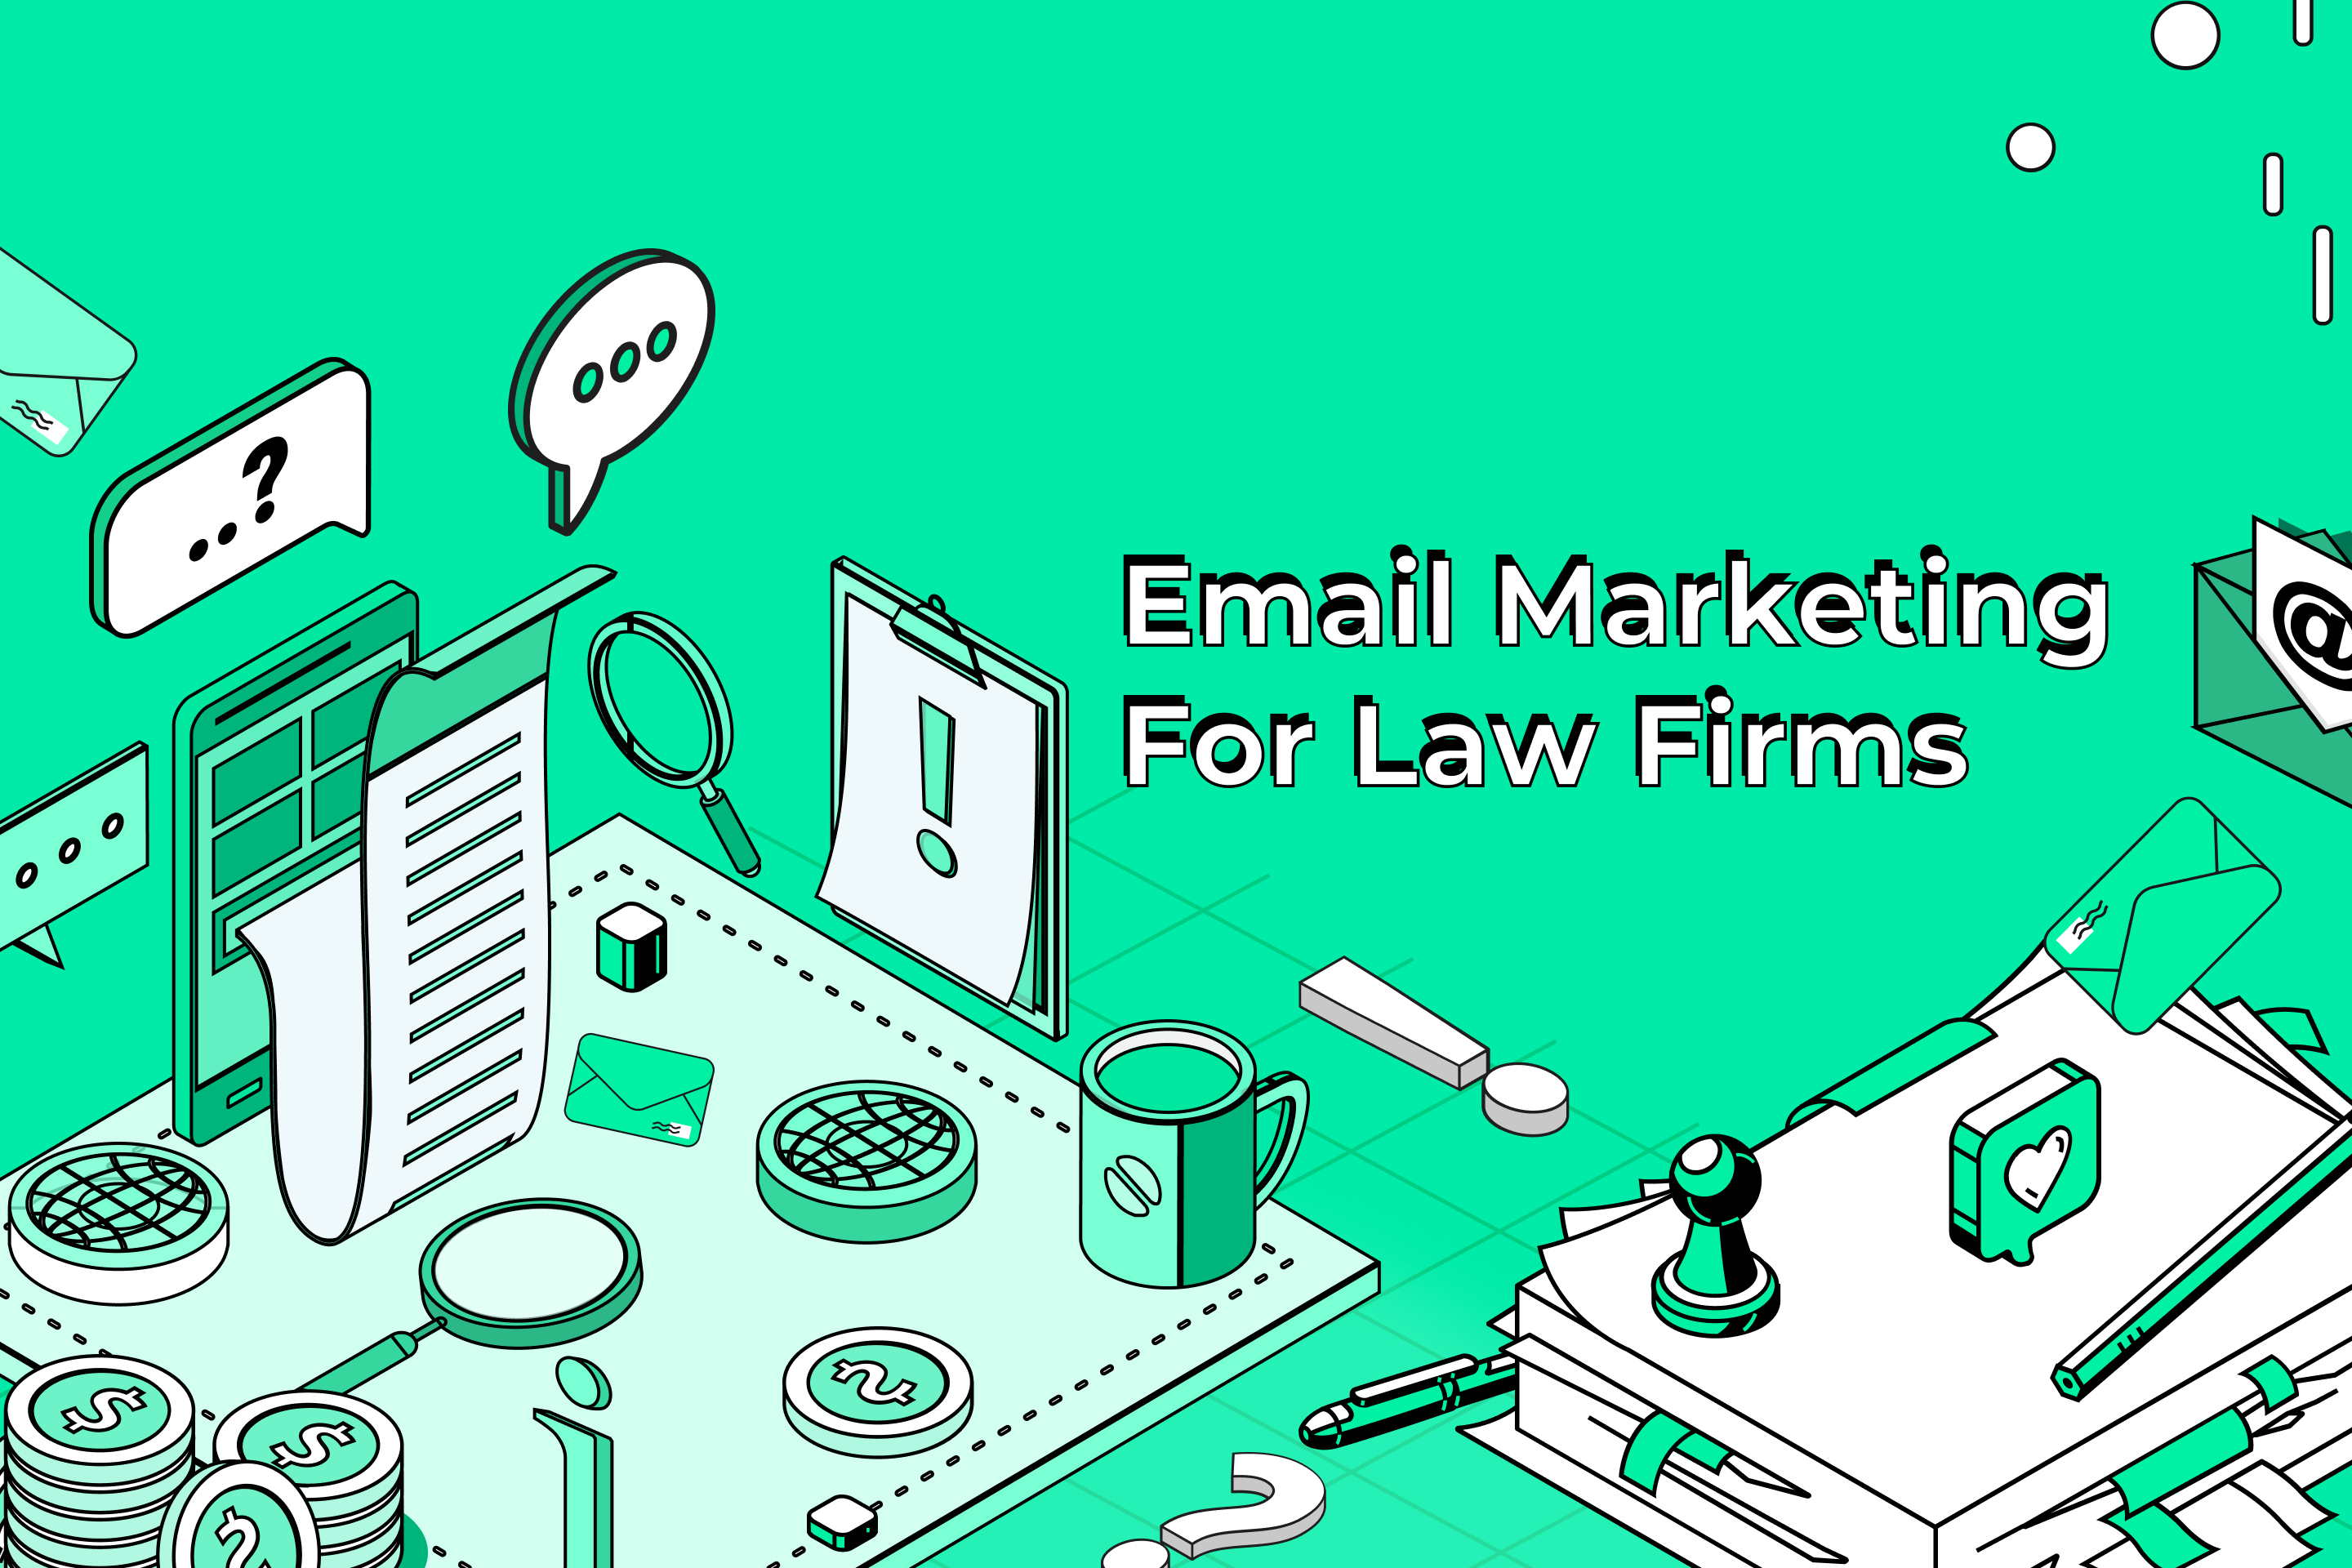 Email Marketing For Law Firms